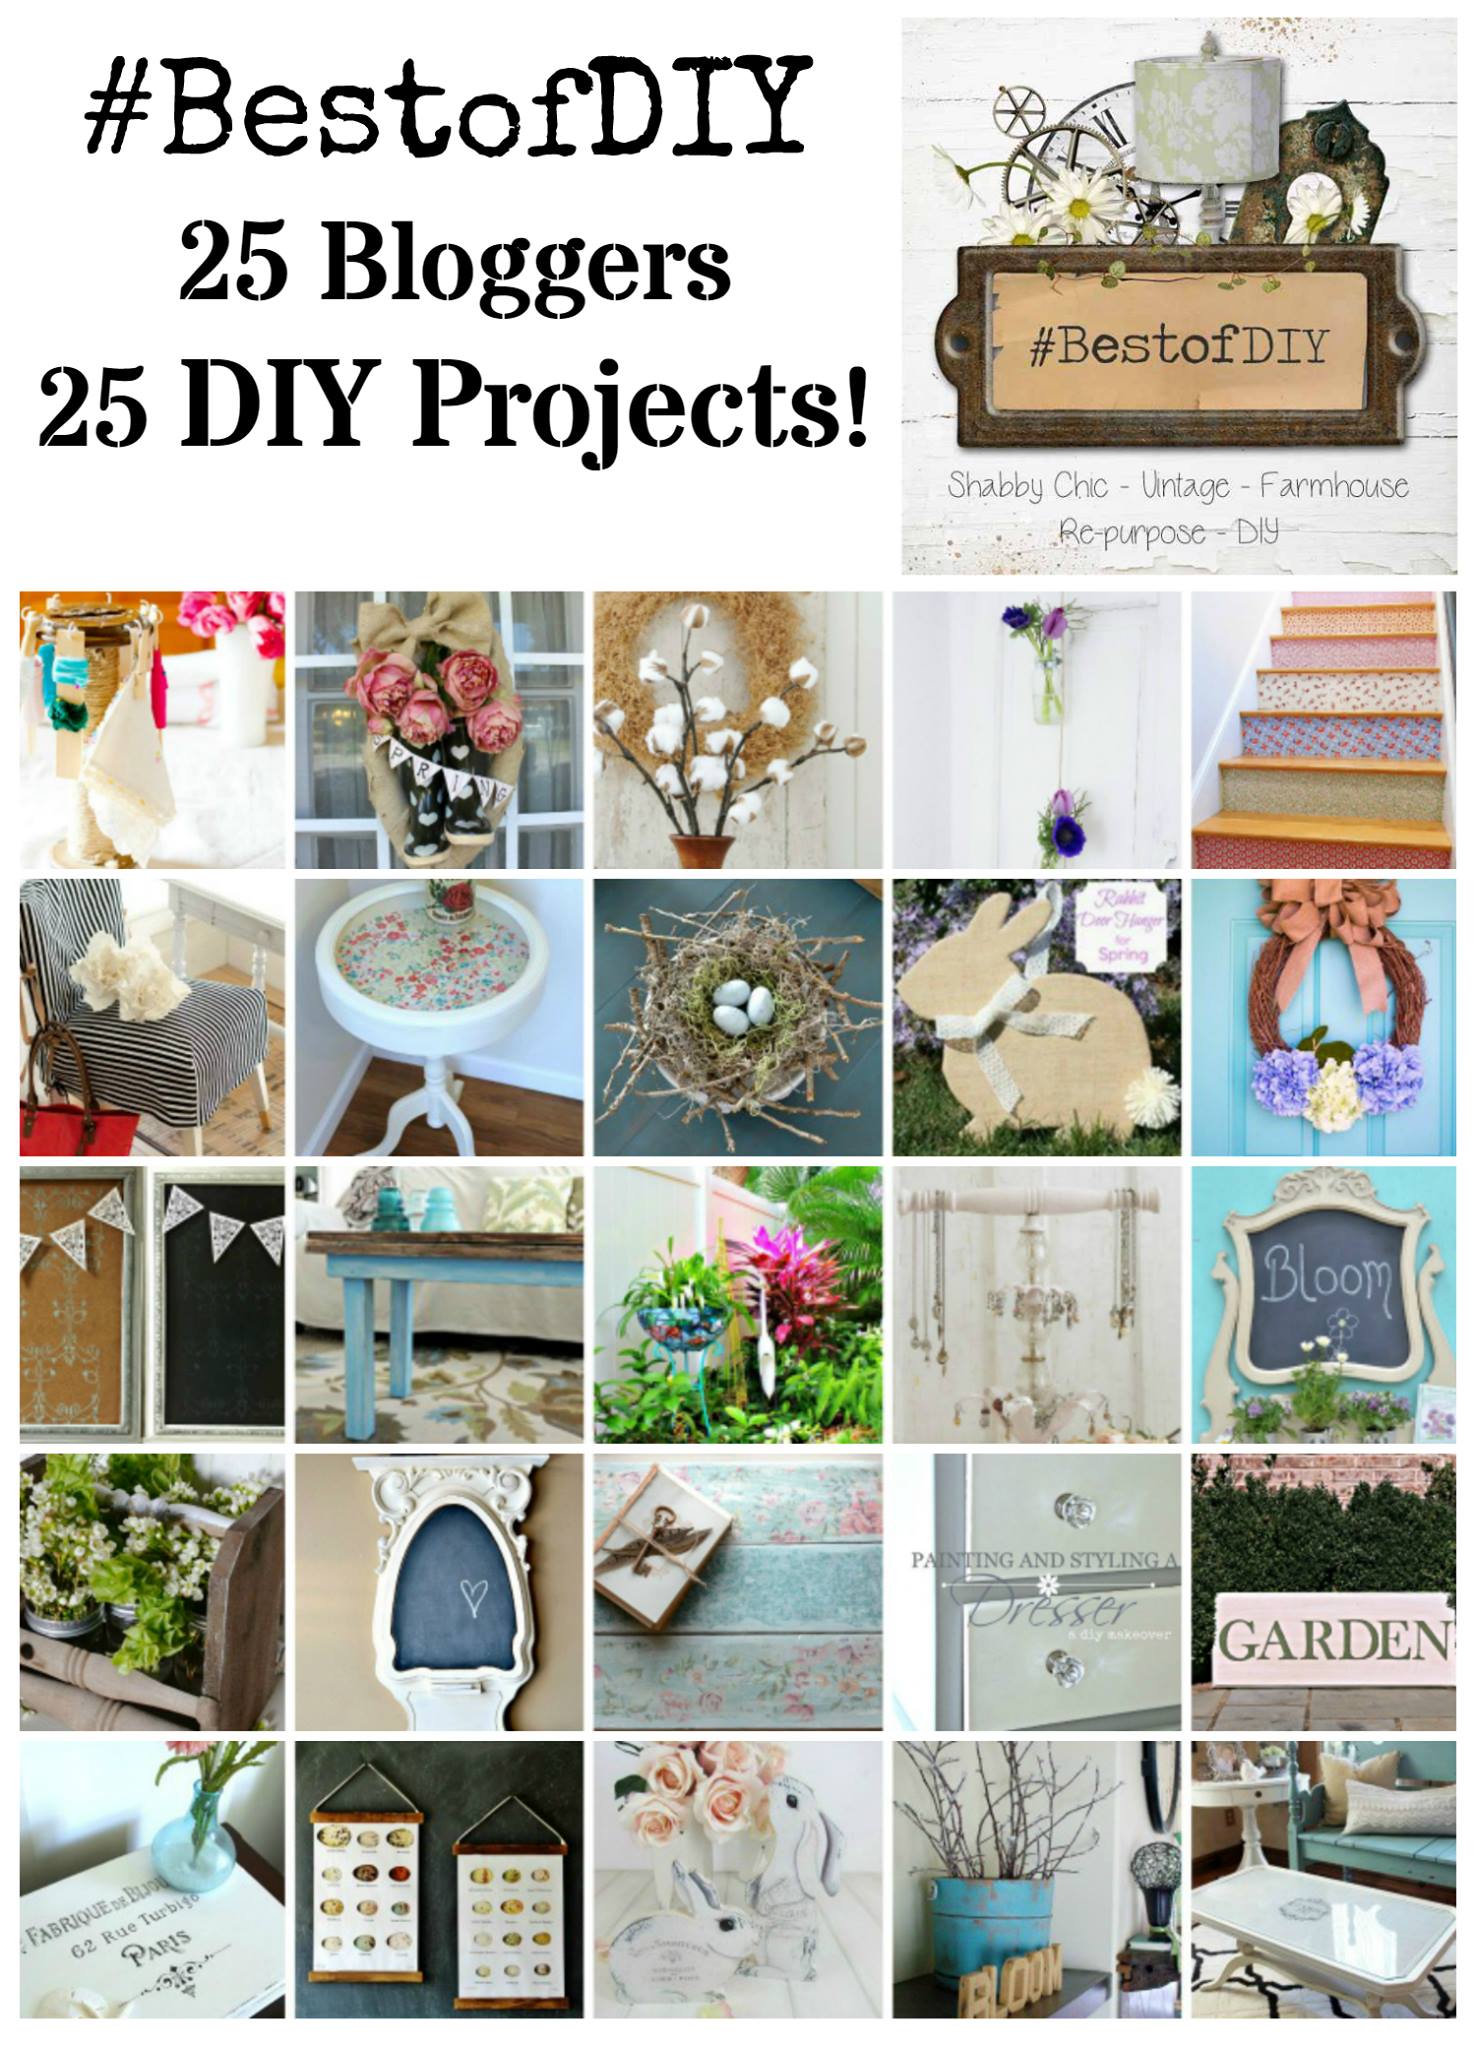 Best of DIY projects